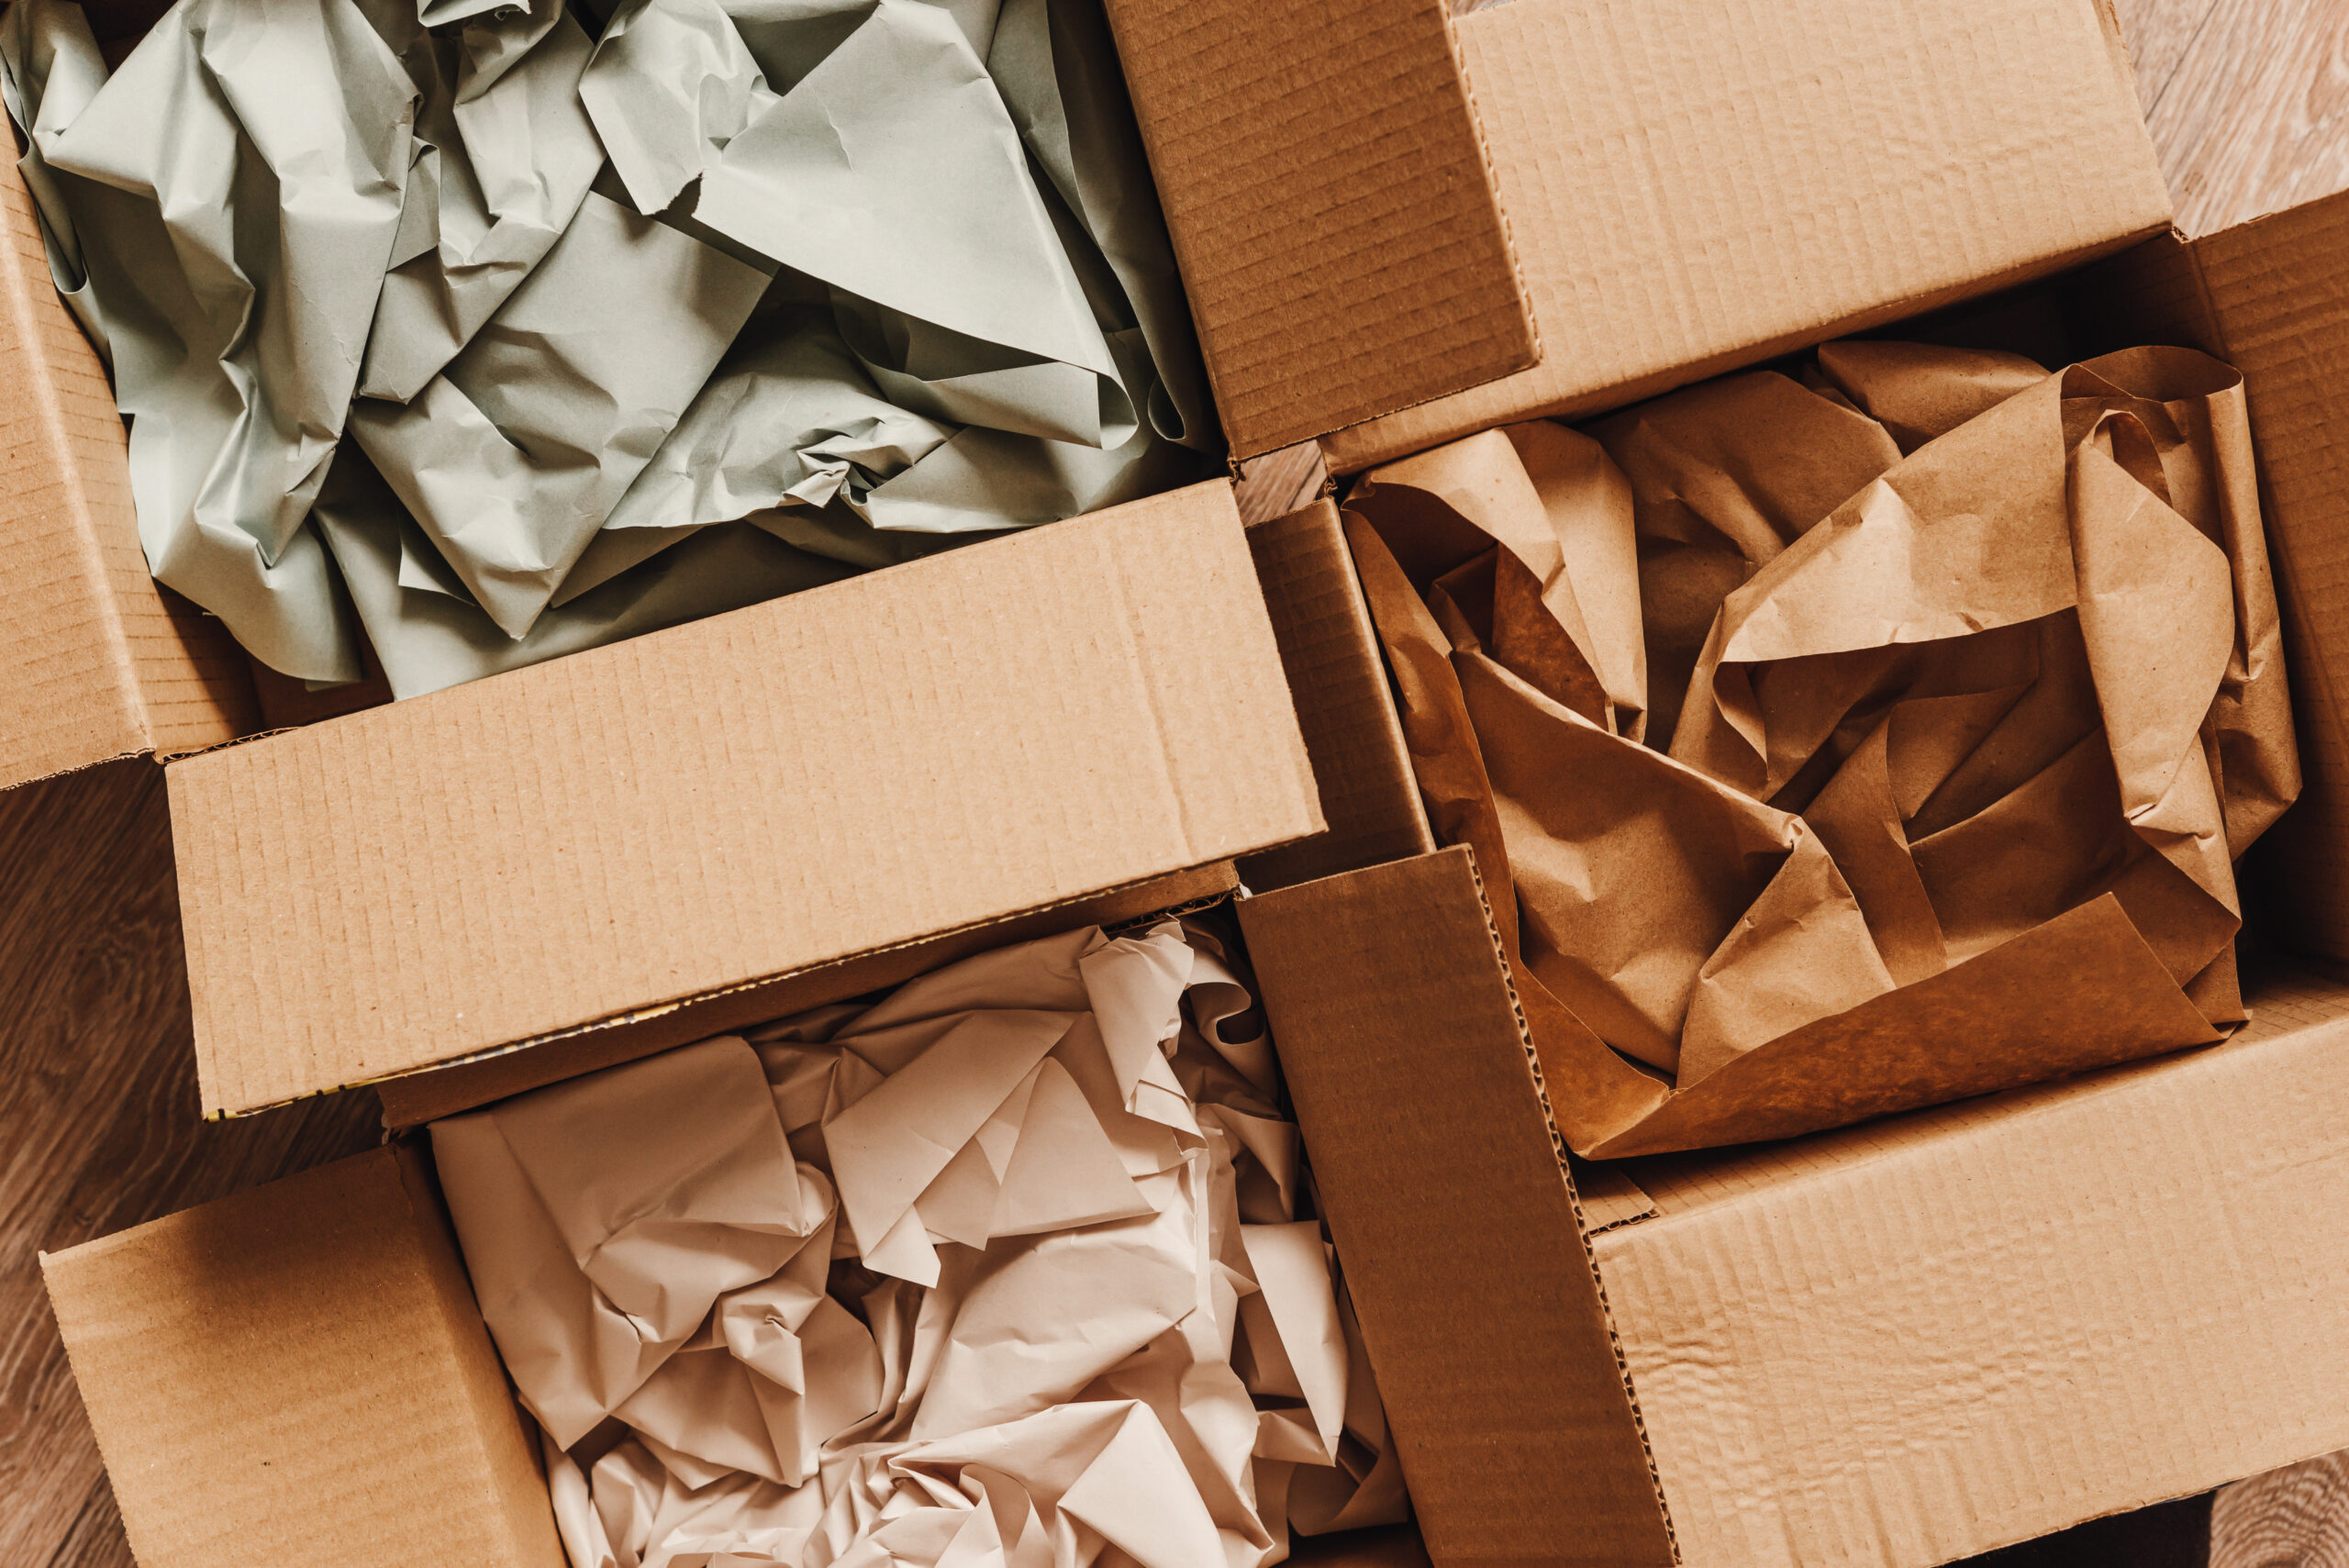 Cardboard,Boxes,With,Crumpled,Paper,Inside,For,Packaging,Goods,From